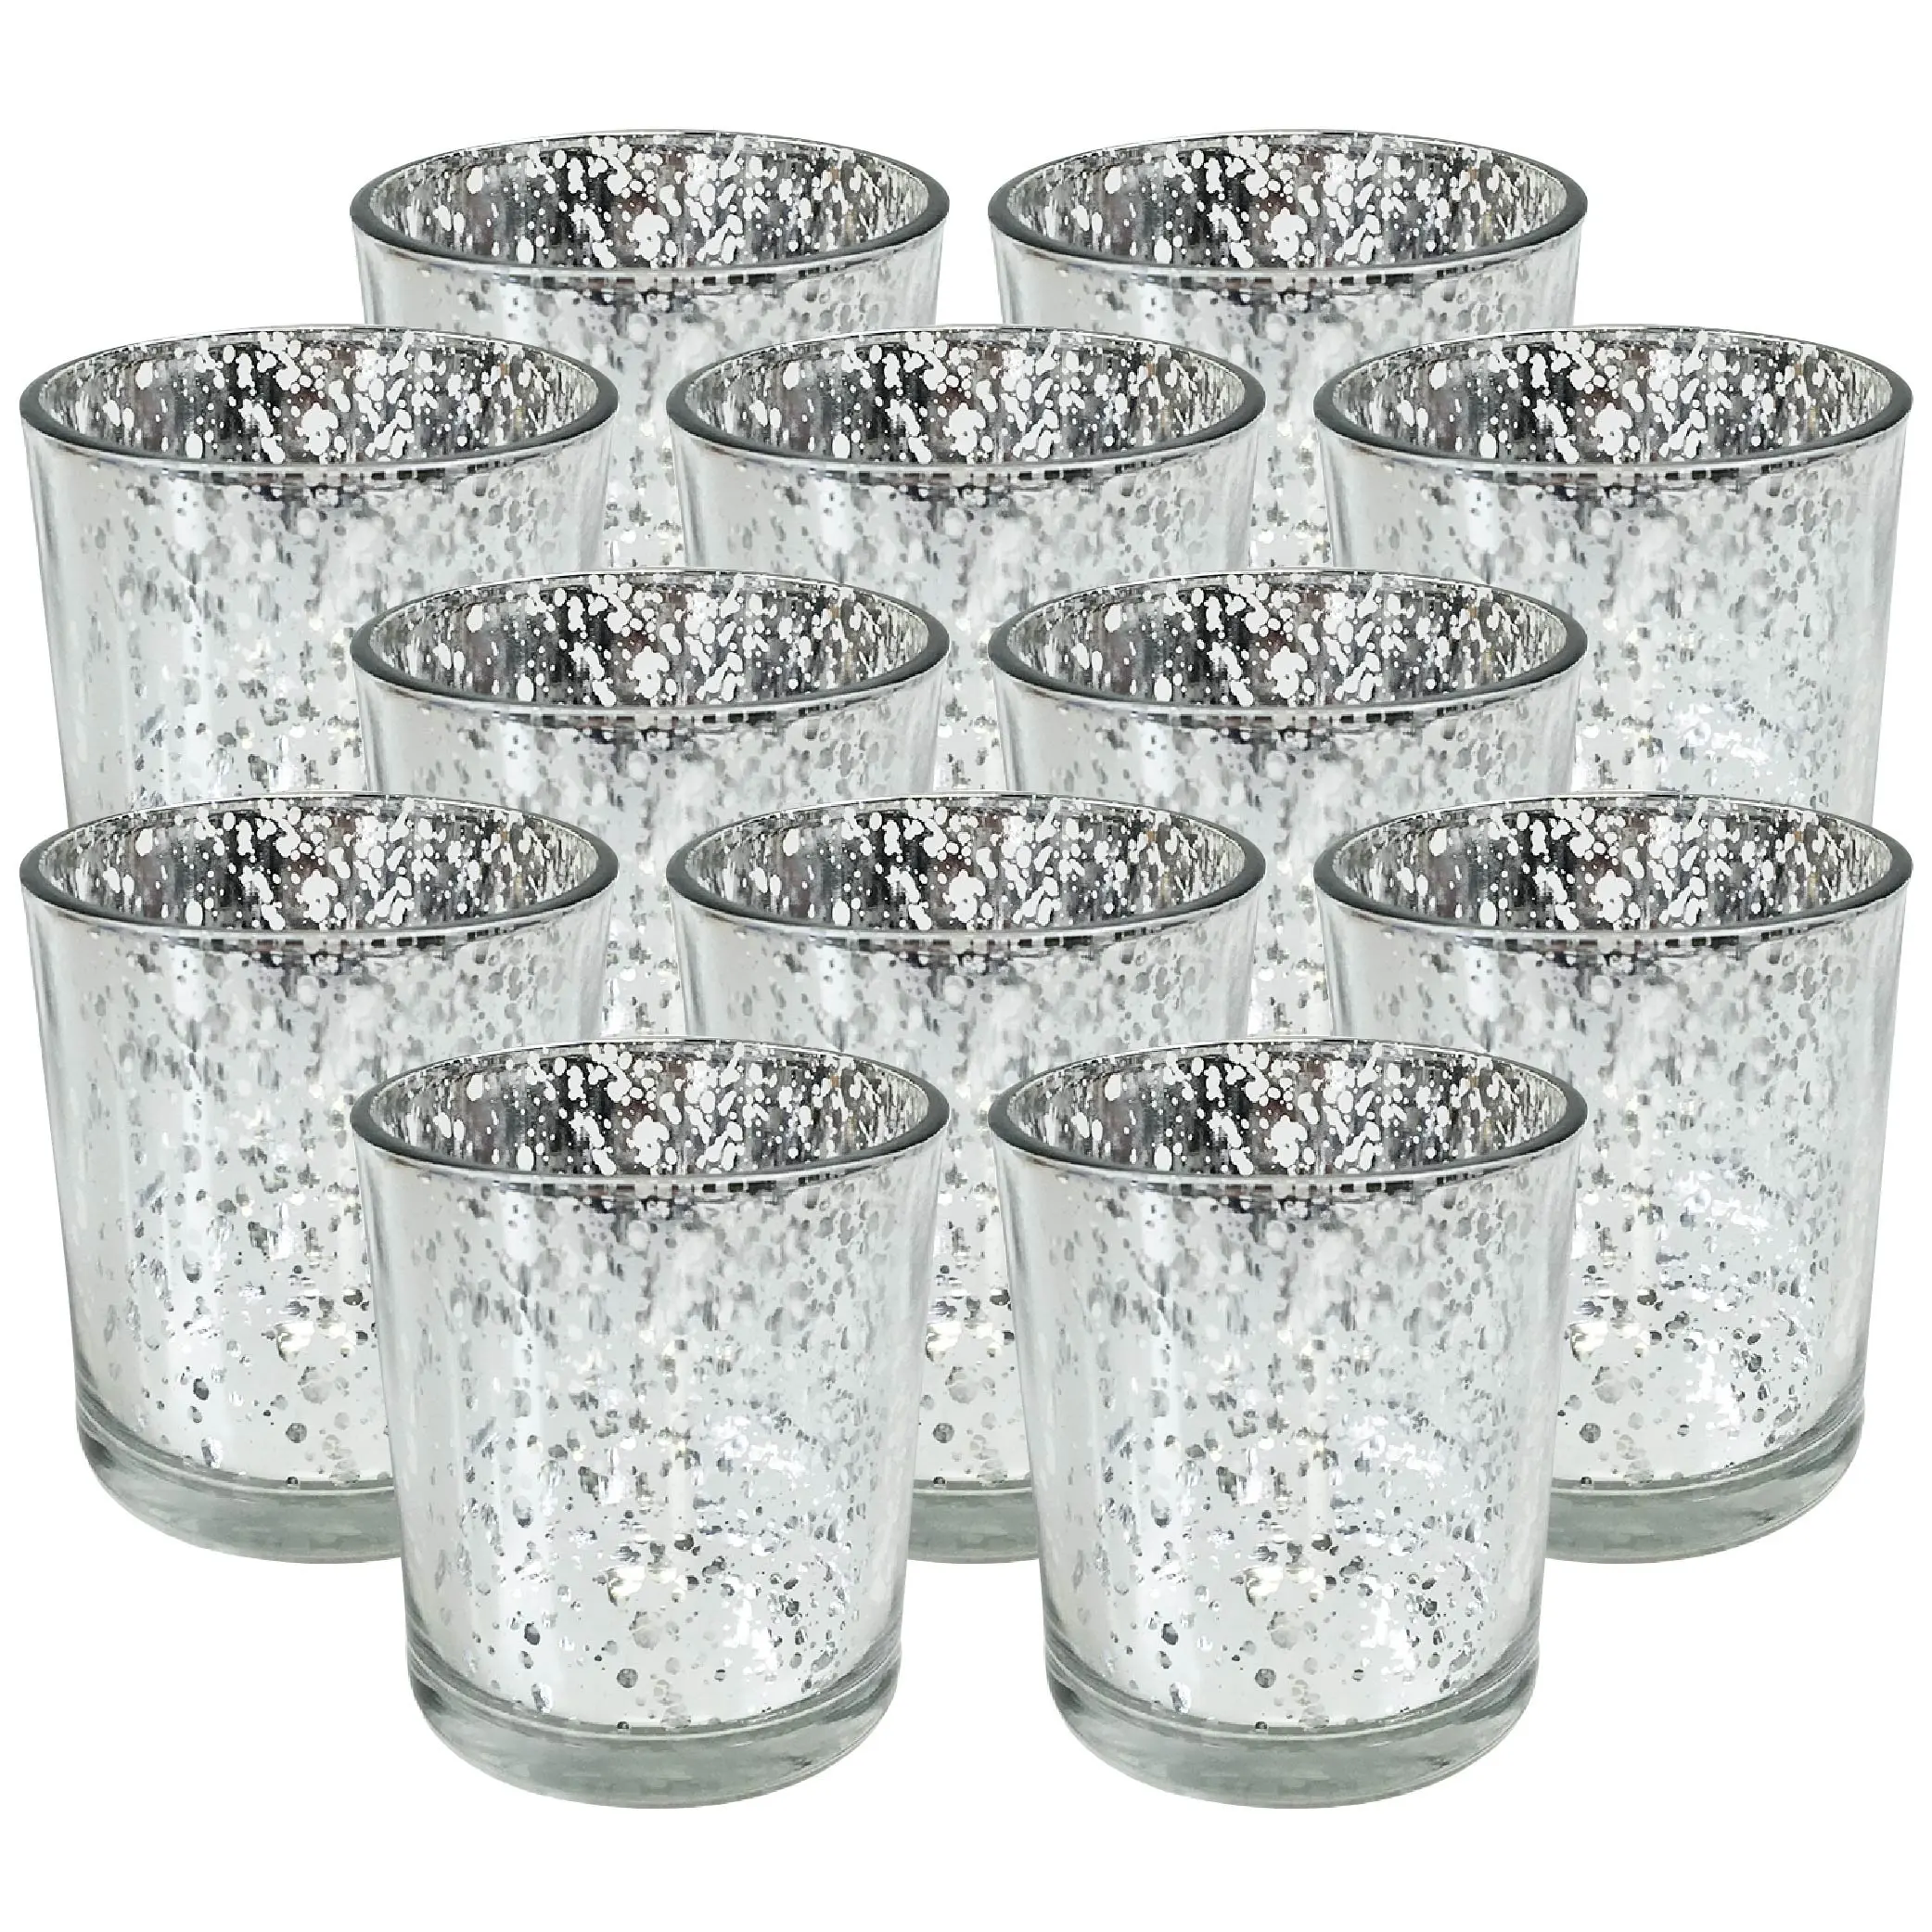 Just Artifacts Halloween Silver Glass Votive Candle Holder with Ghosts 1pcs, Silver Ghosts Glass Votive Candle Holders for Halloween Parties and Home D/écor